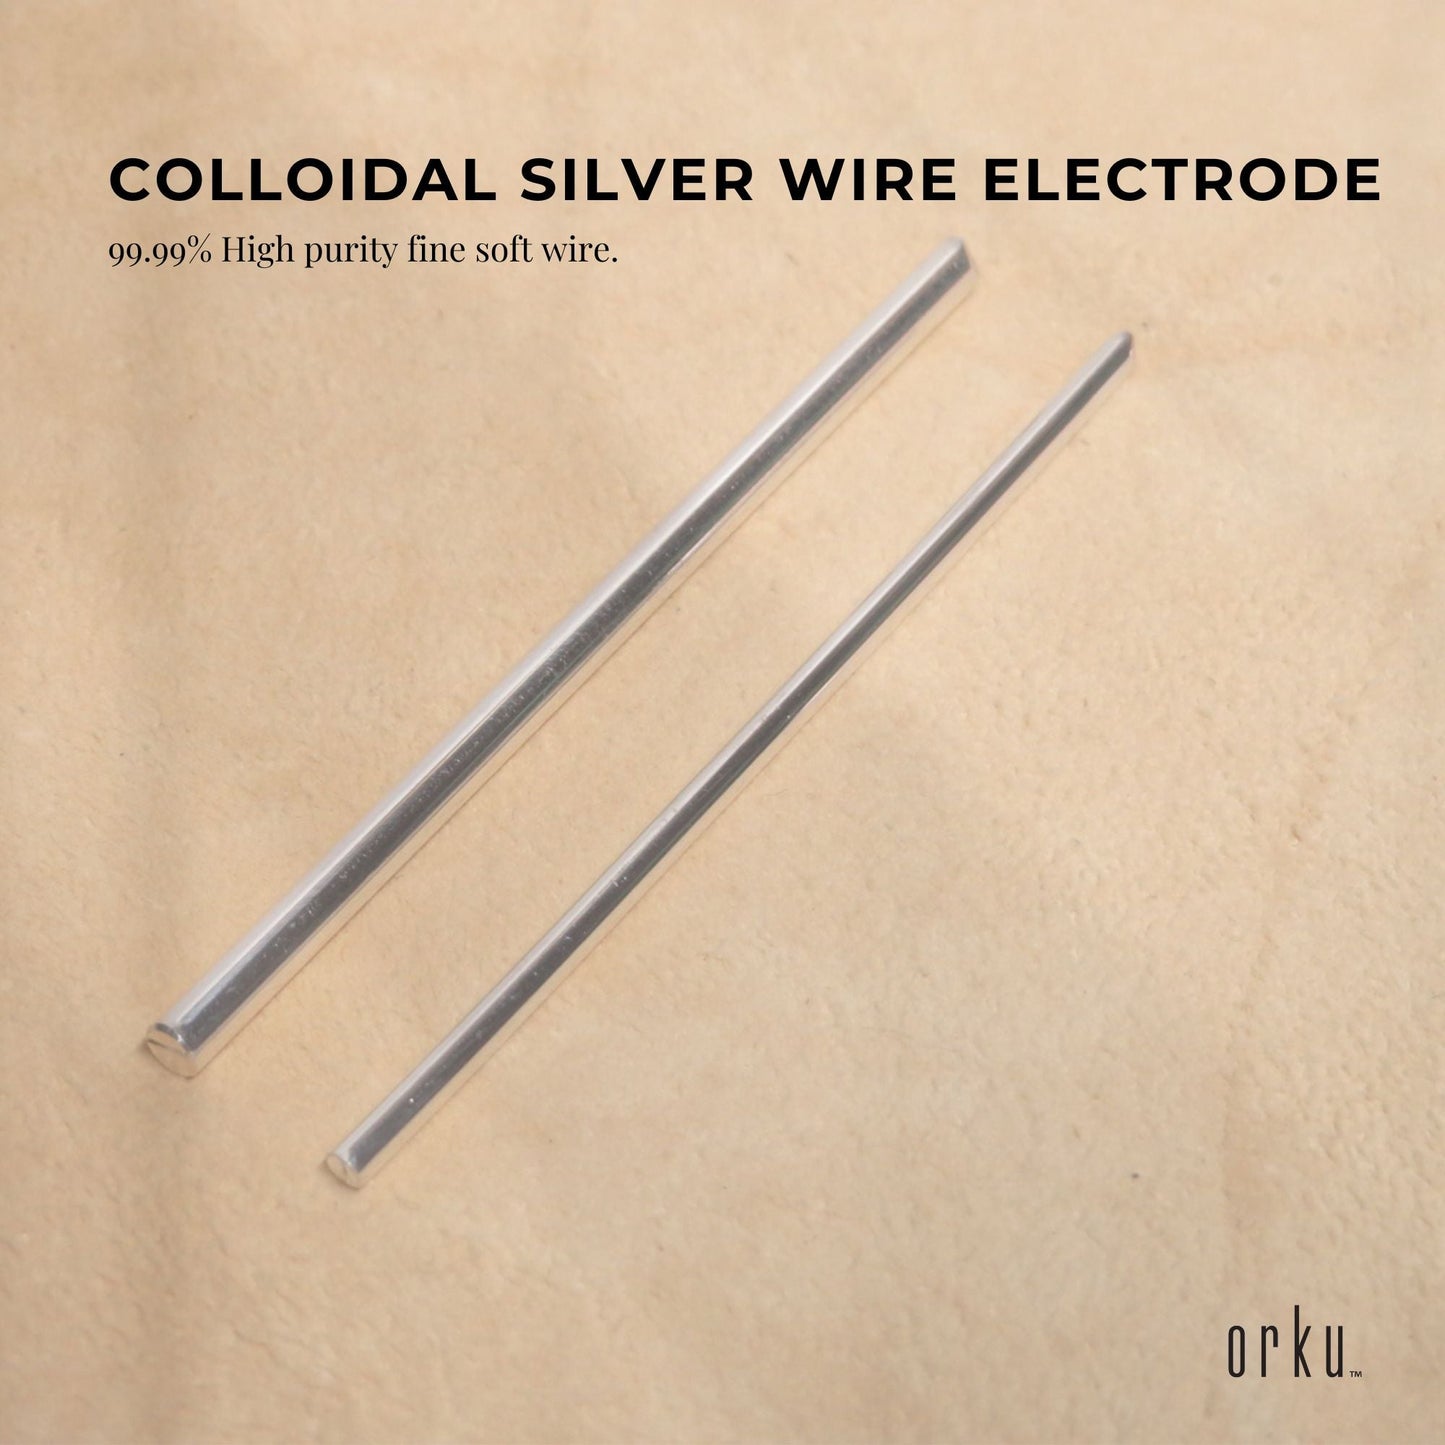 1x 7" Silver Rod 18 Gauge 99.99% High Purity Fine Soft Wire Colloidal Electrode